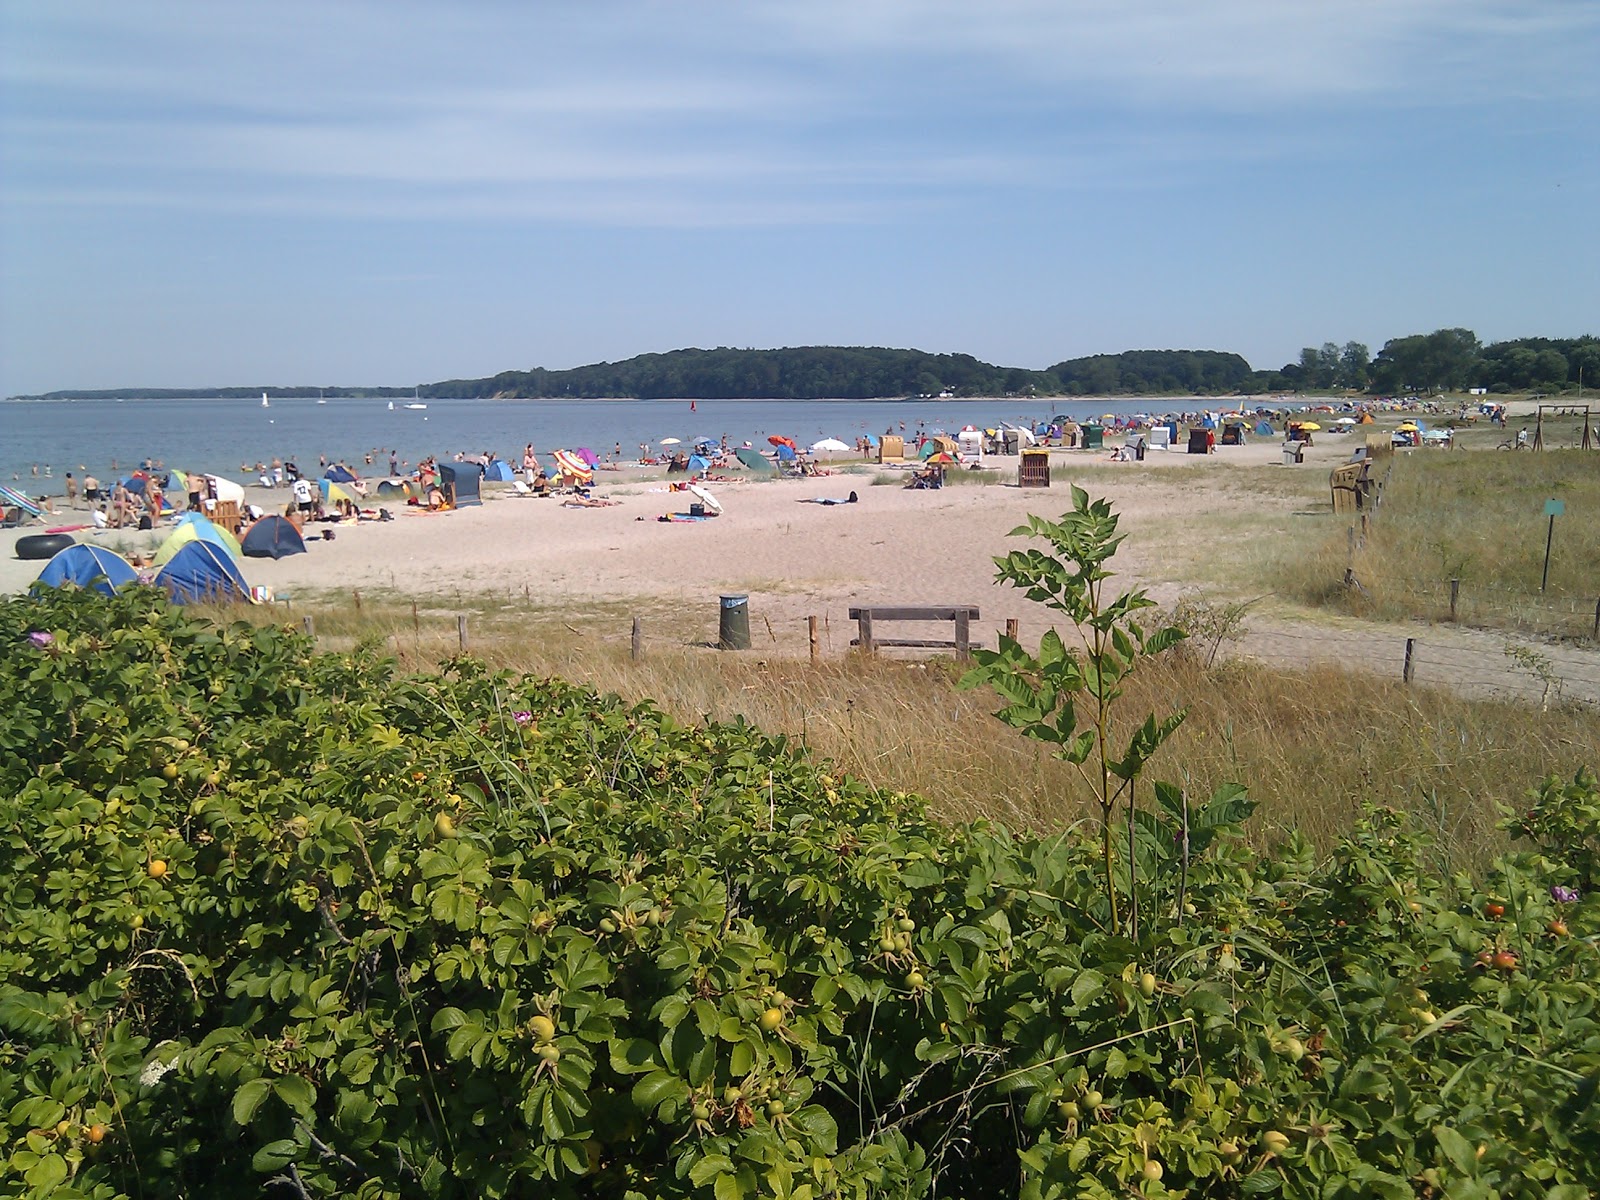 Photo of Sudstrand Eckernforde - popular place among relax connoisseurs